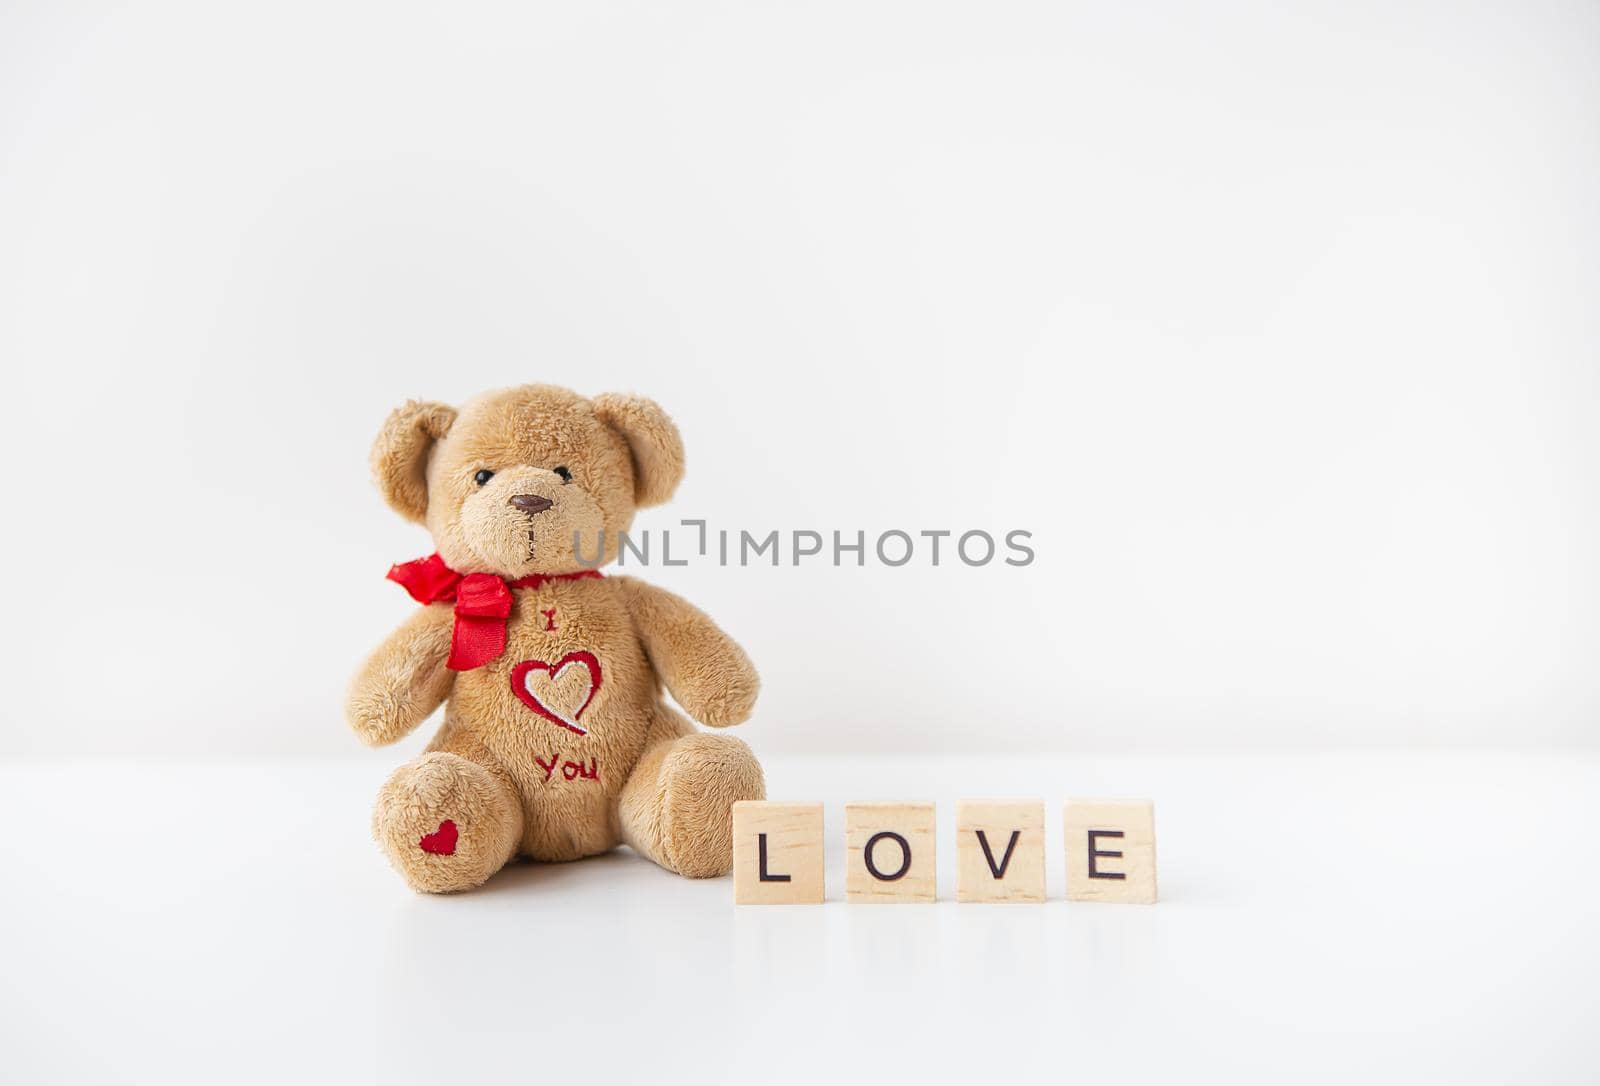 Cute toy teddy bear with a heart isolated on a white background. Love lettering, Valentine's Day holiday concept